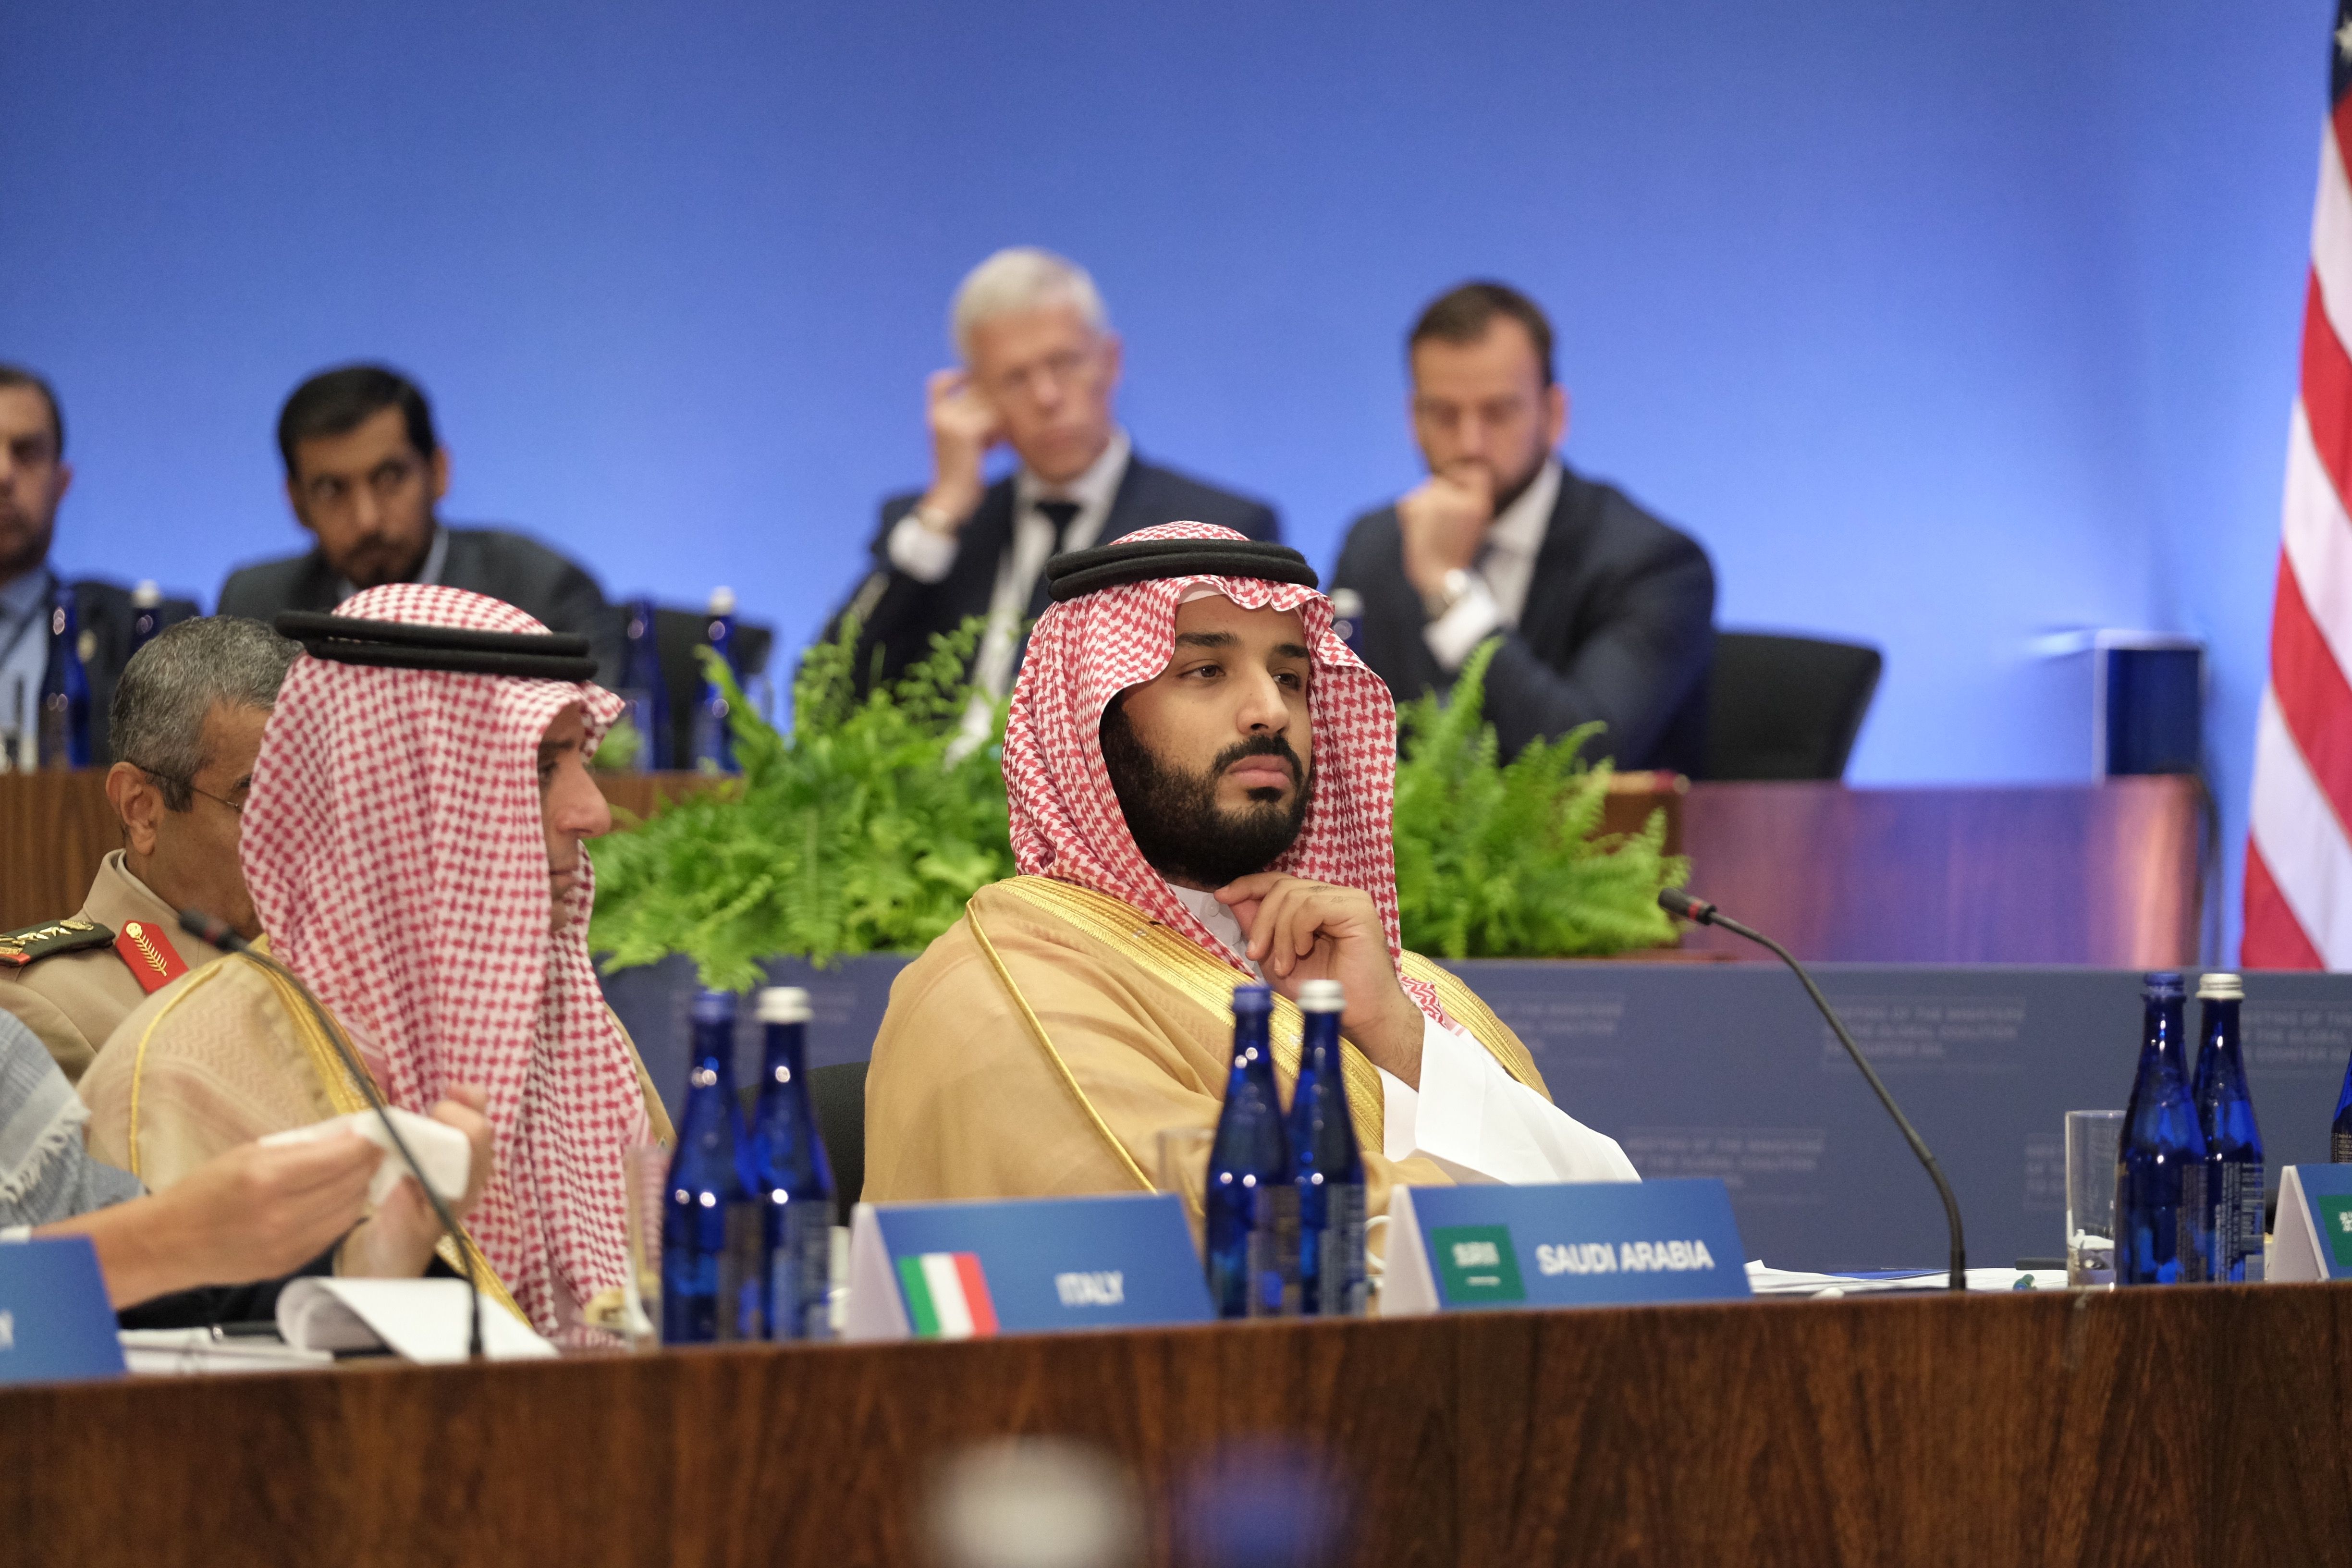 Can Crown Prince Mohammed bin Salman’s ambitious plans jumpstart social and economic reform, or are they an expensive miscalculation? Image courtesy State Department. United States, 2016.